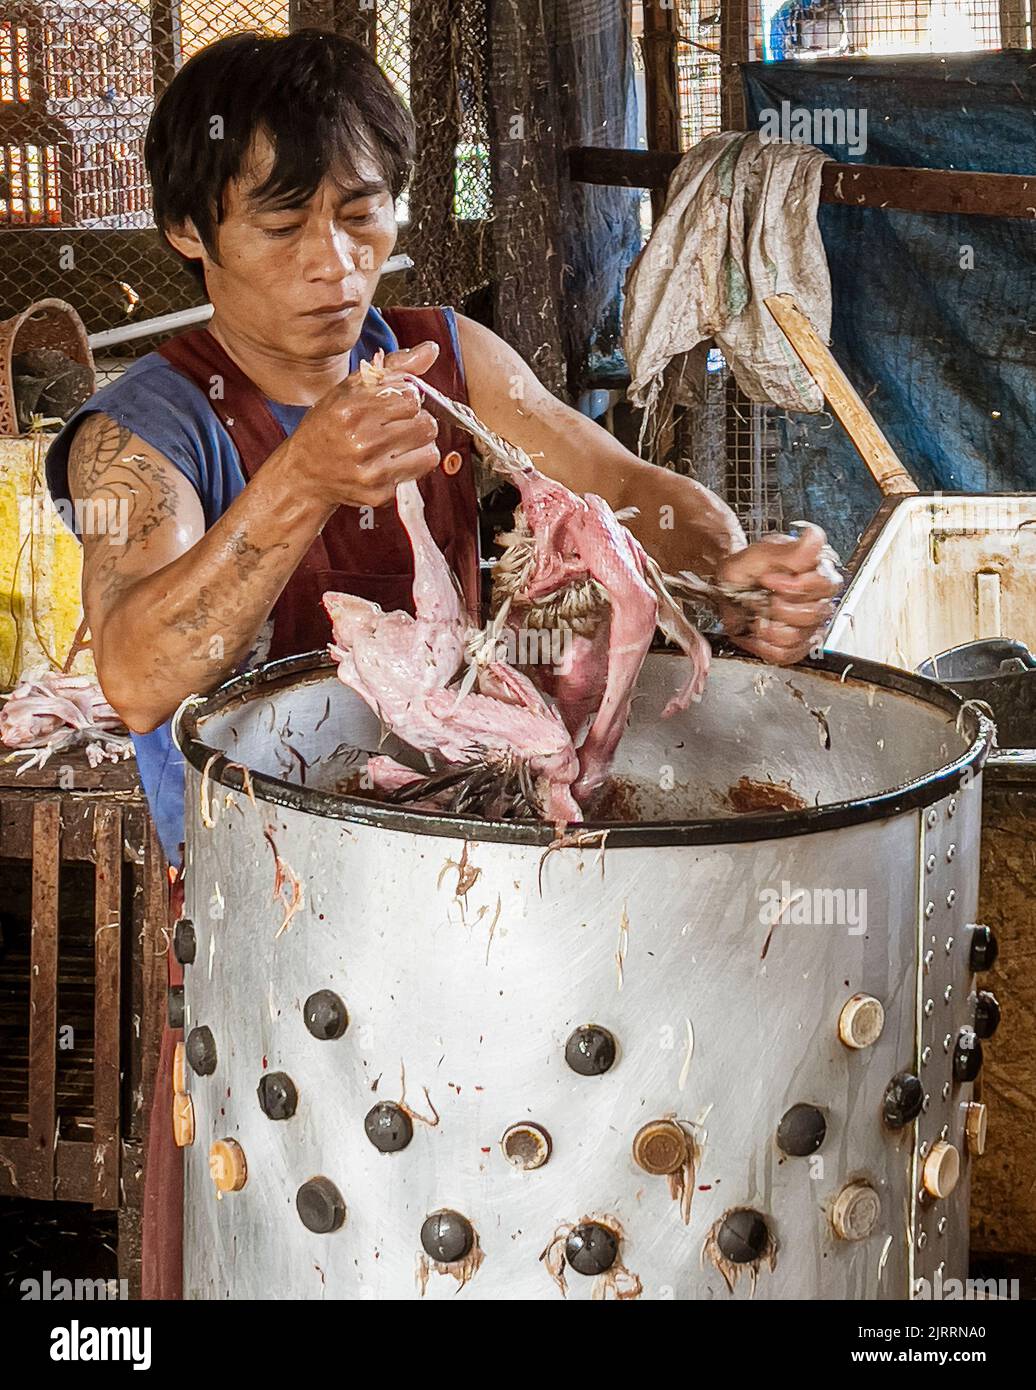 Indonesia, June 13 2022 - Man pulls chickens out of machine that removed all feathers. Stock Photo